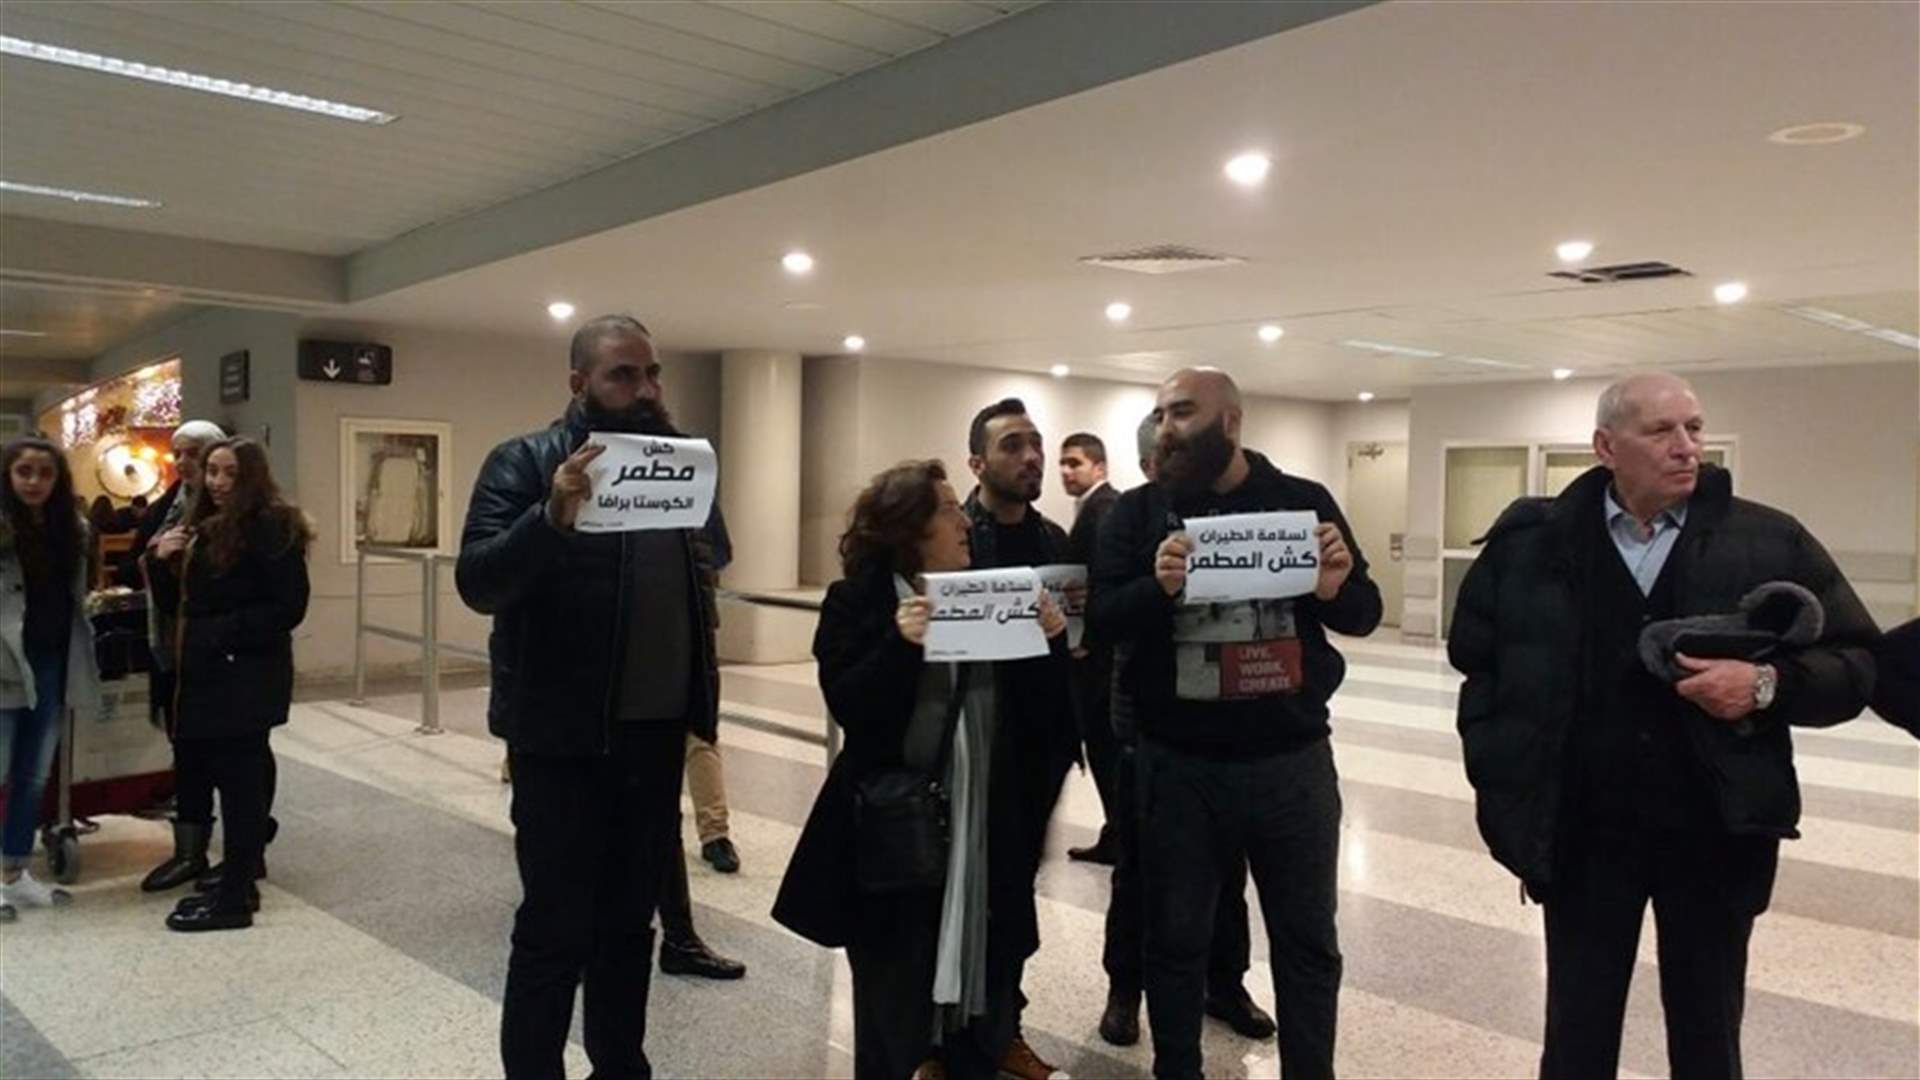 VIDEO: ‘You Stink’ activists stage protest at Beirut airport